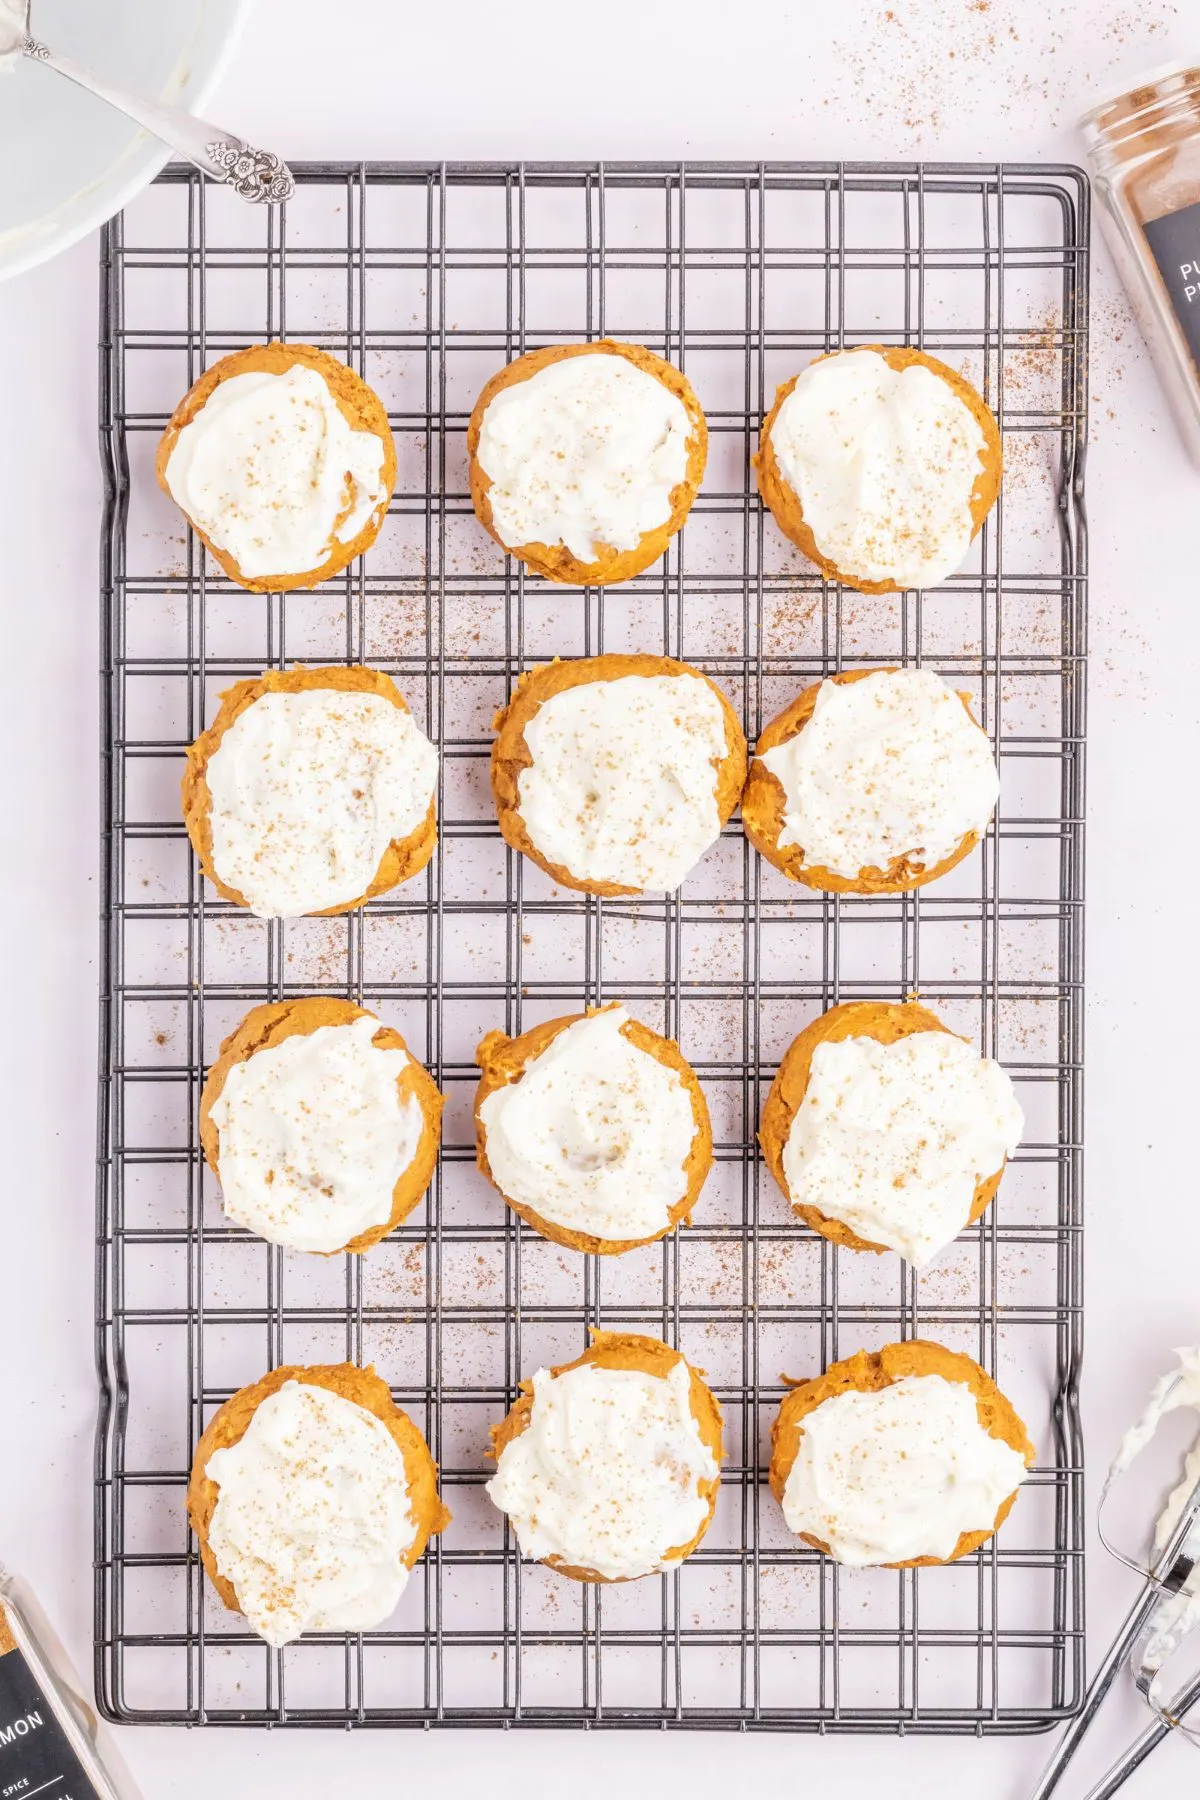 Pumpkin cookies with cream cheese frosting and pumpkin spice on top.